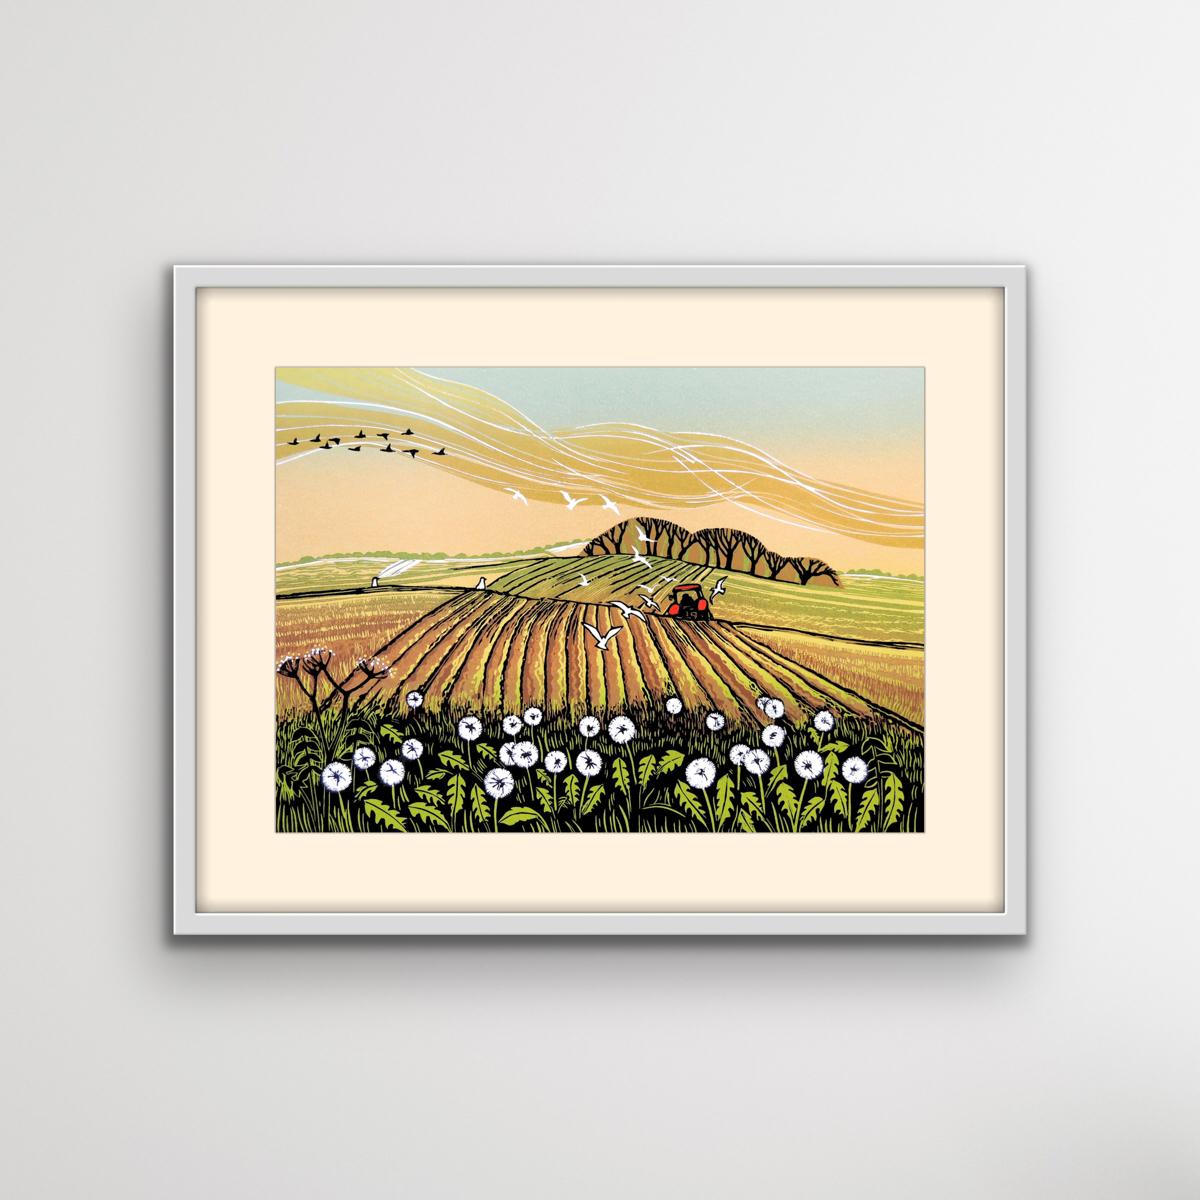 There is a time of year when dandelions abound in the local fields. I often see a red tractor ploughing late crops and this view is inspired by a fine day for dandelions. Ploughings give a sense of direction in cantrast with the dandelion